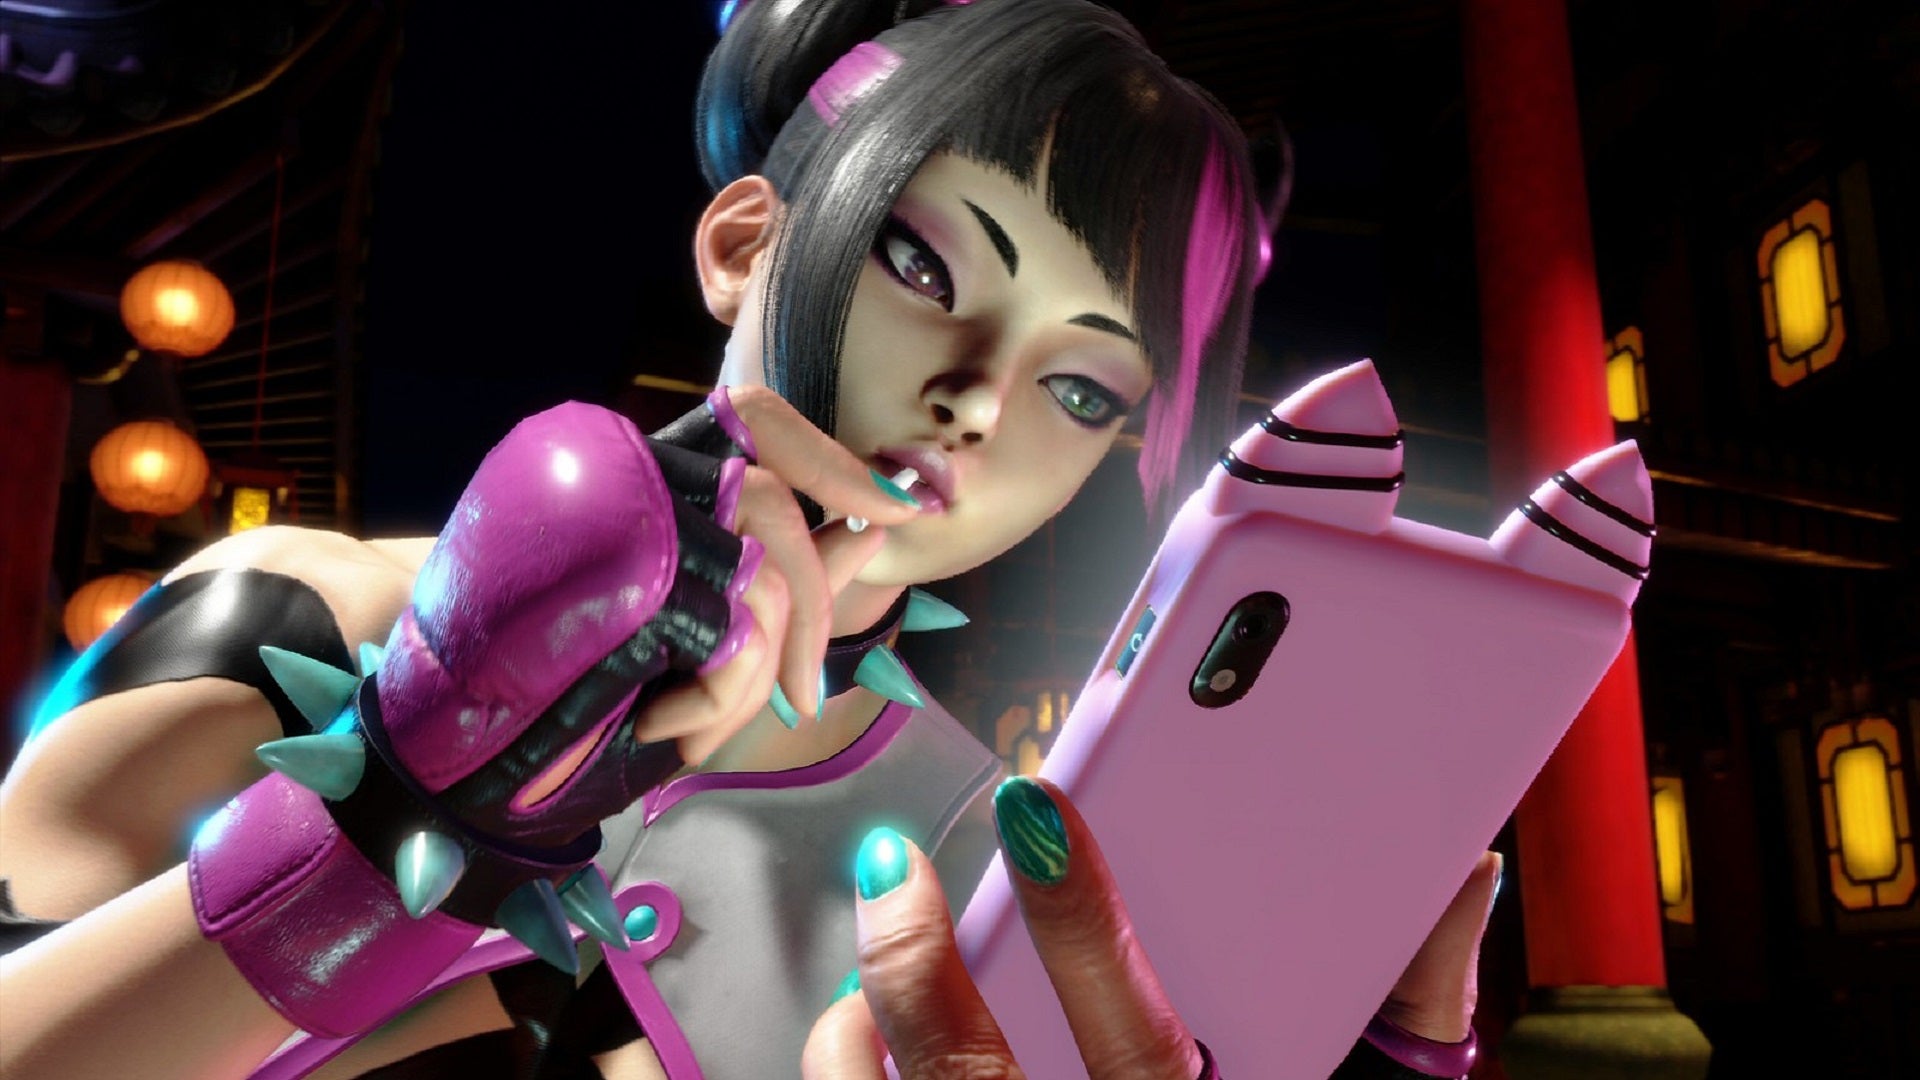 Juri from Street Fighter 6 looking at their smart phone (via Evo 2022 reveal trailer)